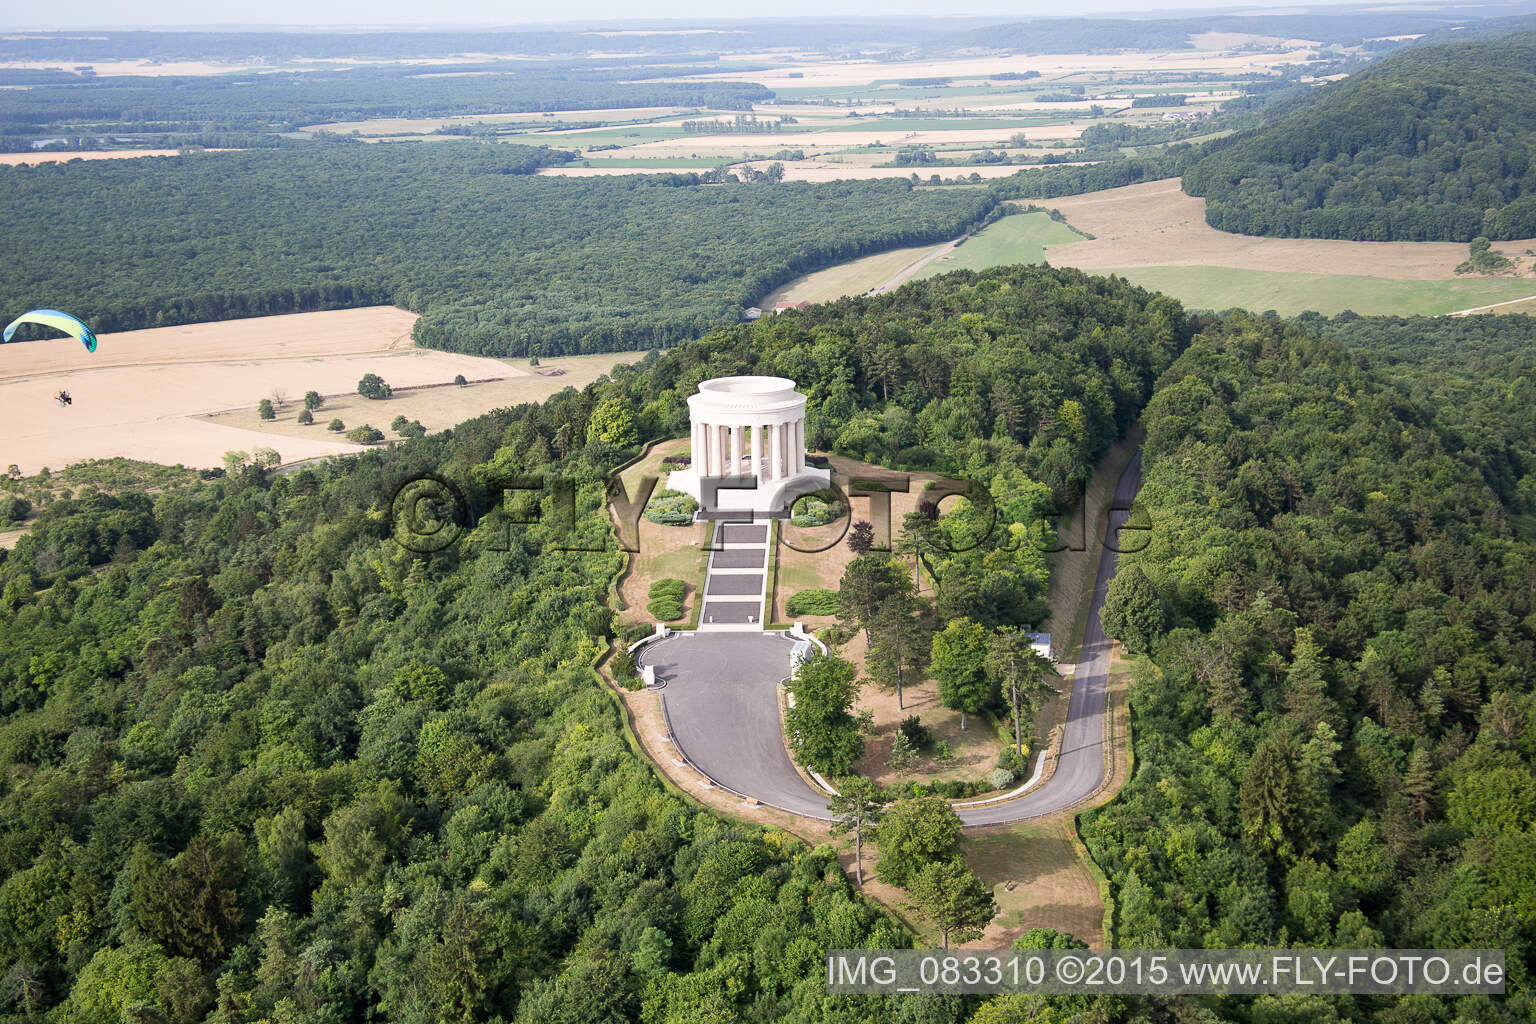 Bird's eye view of American War Memorial in Montsec in the state Meuse, France